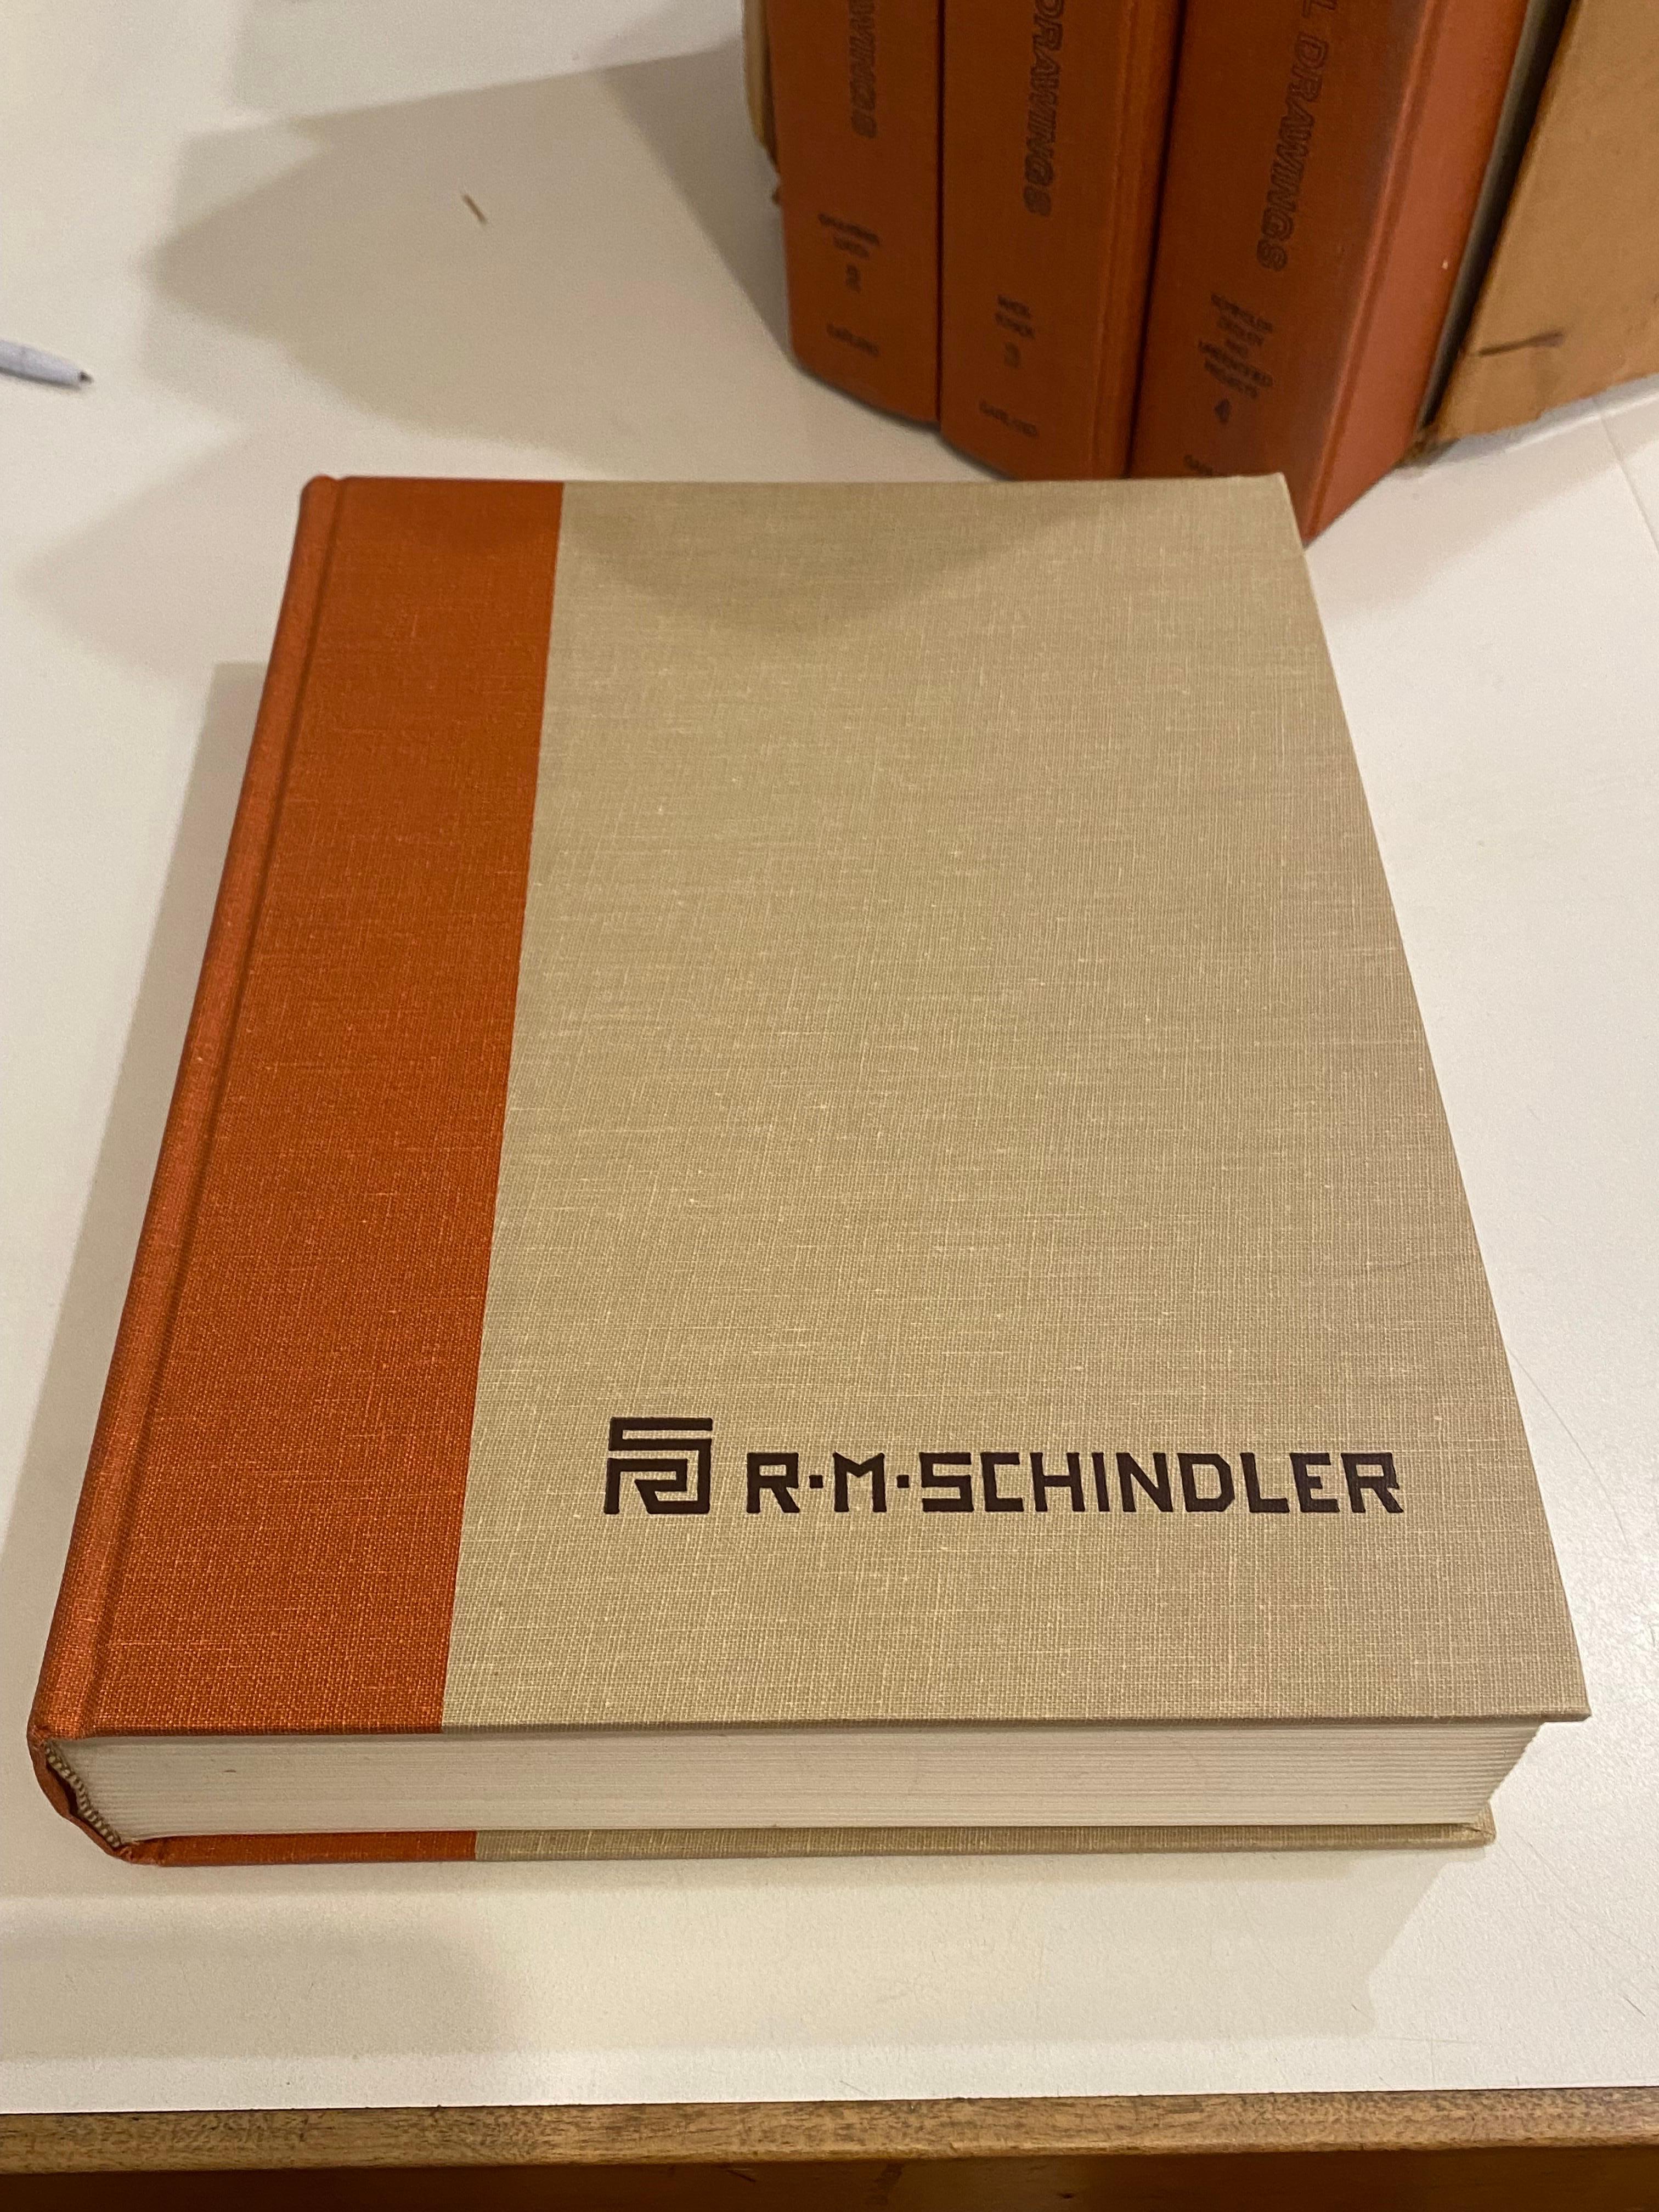 American R.M. Schindler 4 volumn Set of his Architectual Drawings For Sale